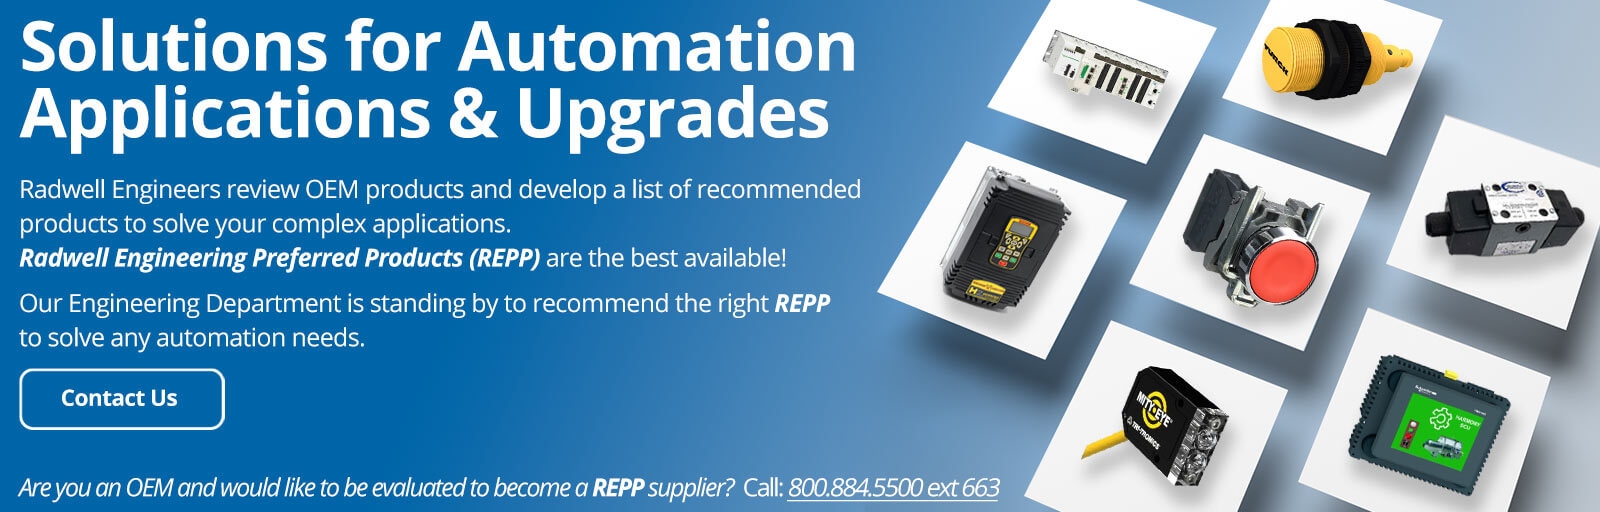 Solutions for Automation Applications & Upgrades